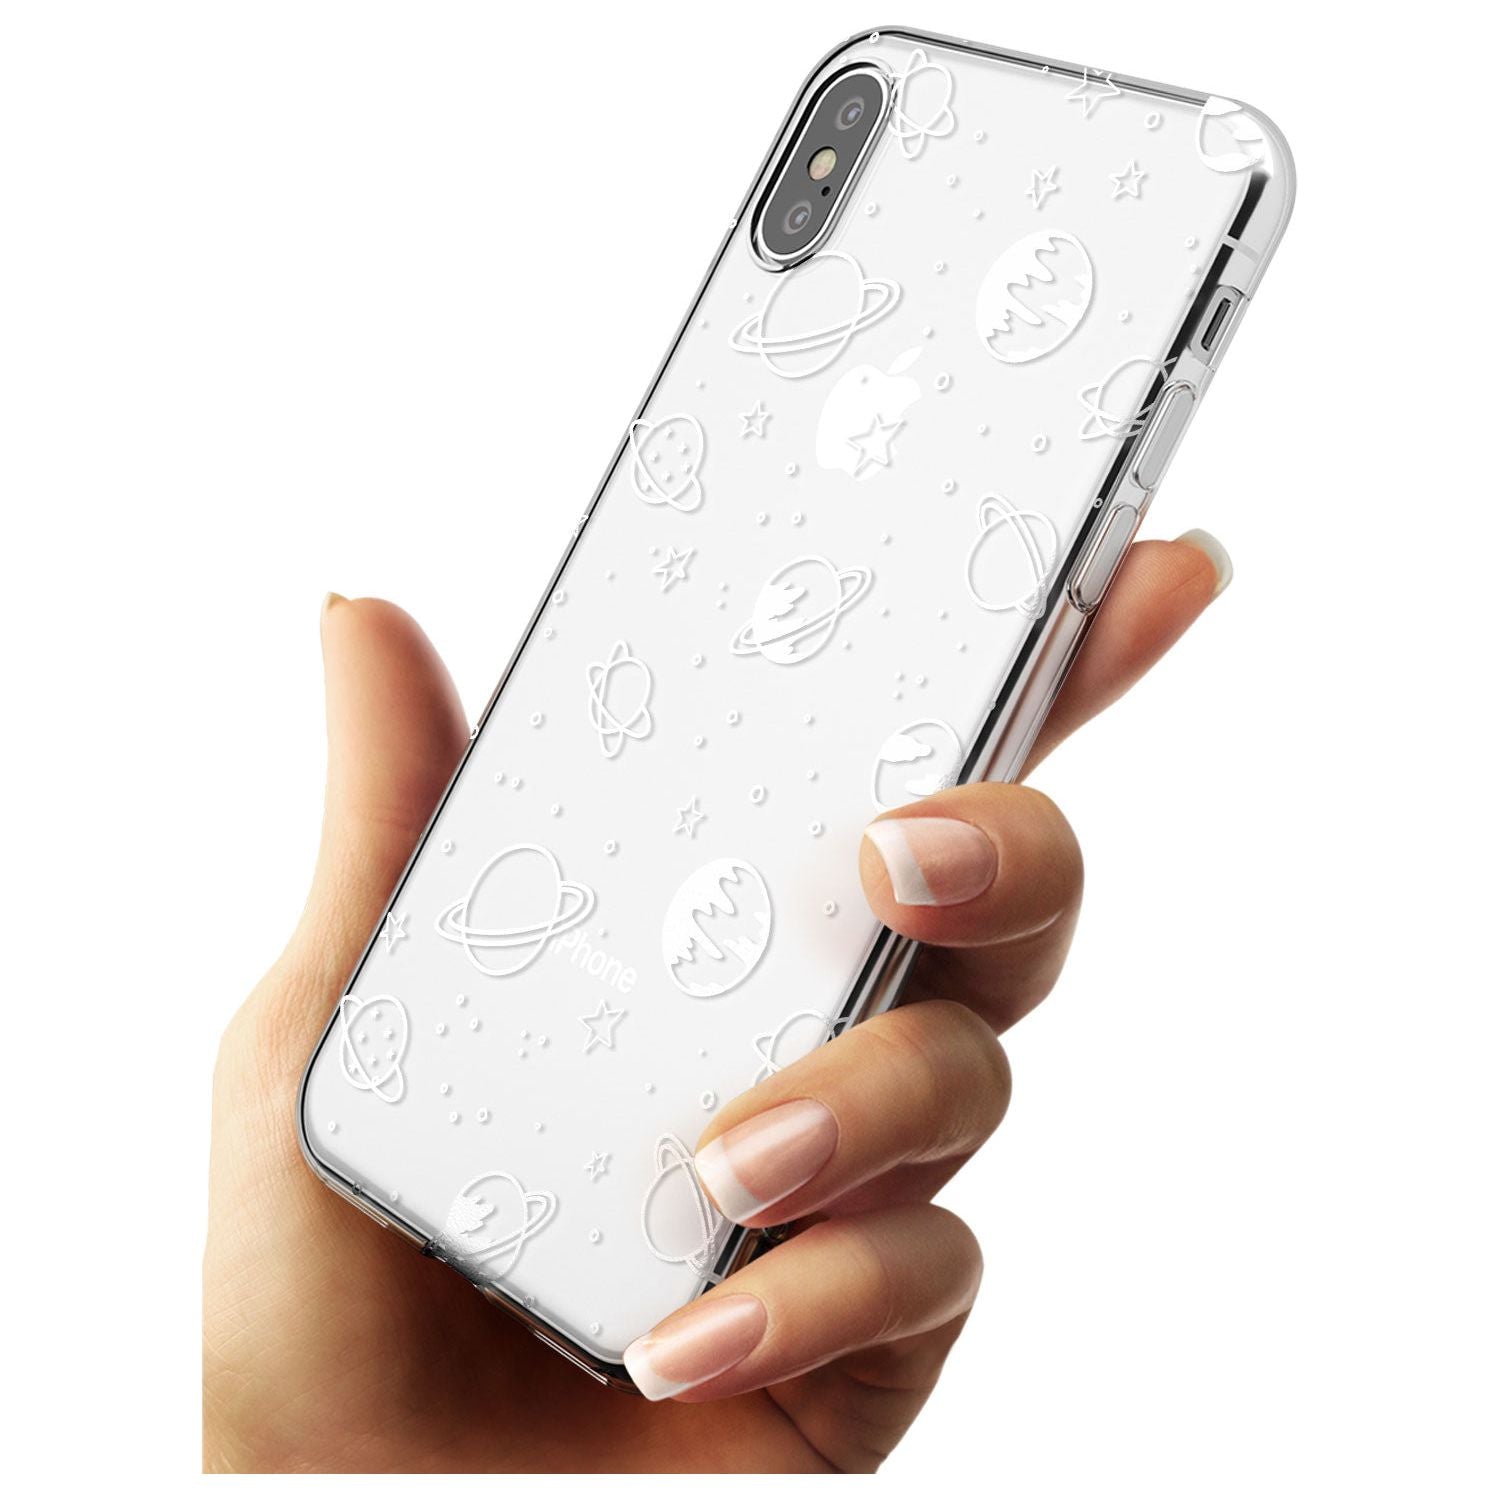 Outer Space Outlines: White on Clear Black Impact Phone Case for iPhone X XS Max XR